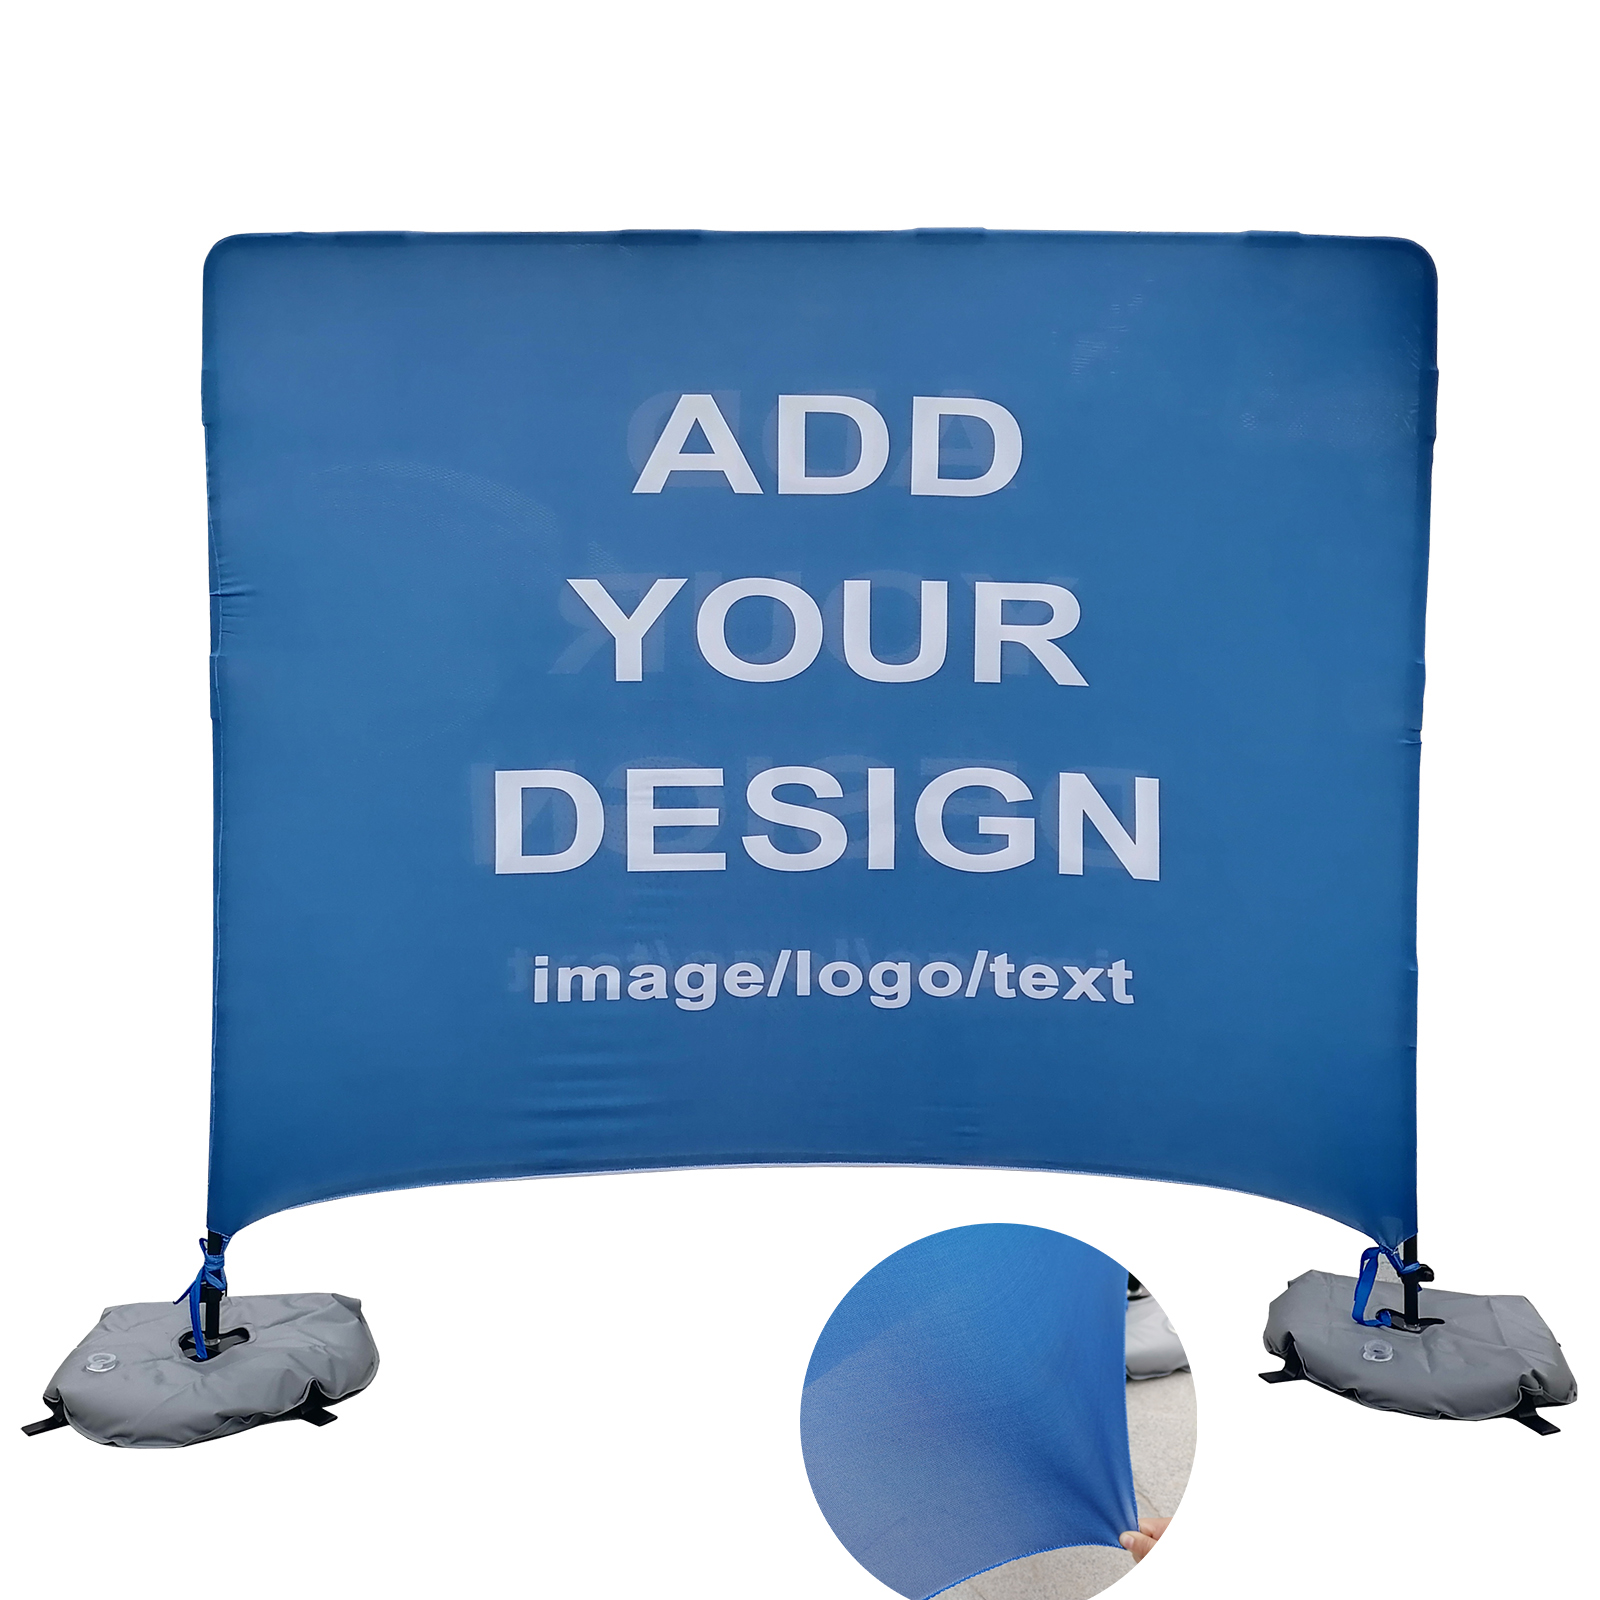 Custom Elastic Banner Personalized Double Sided Backdrop Display for Trade Show Exhibitions Business Events Indoor Outdoor Party Decoration